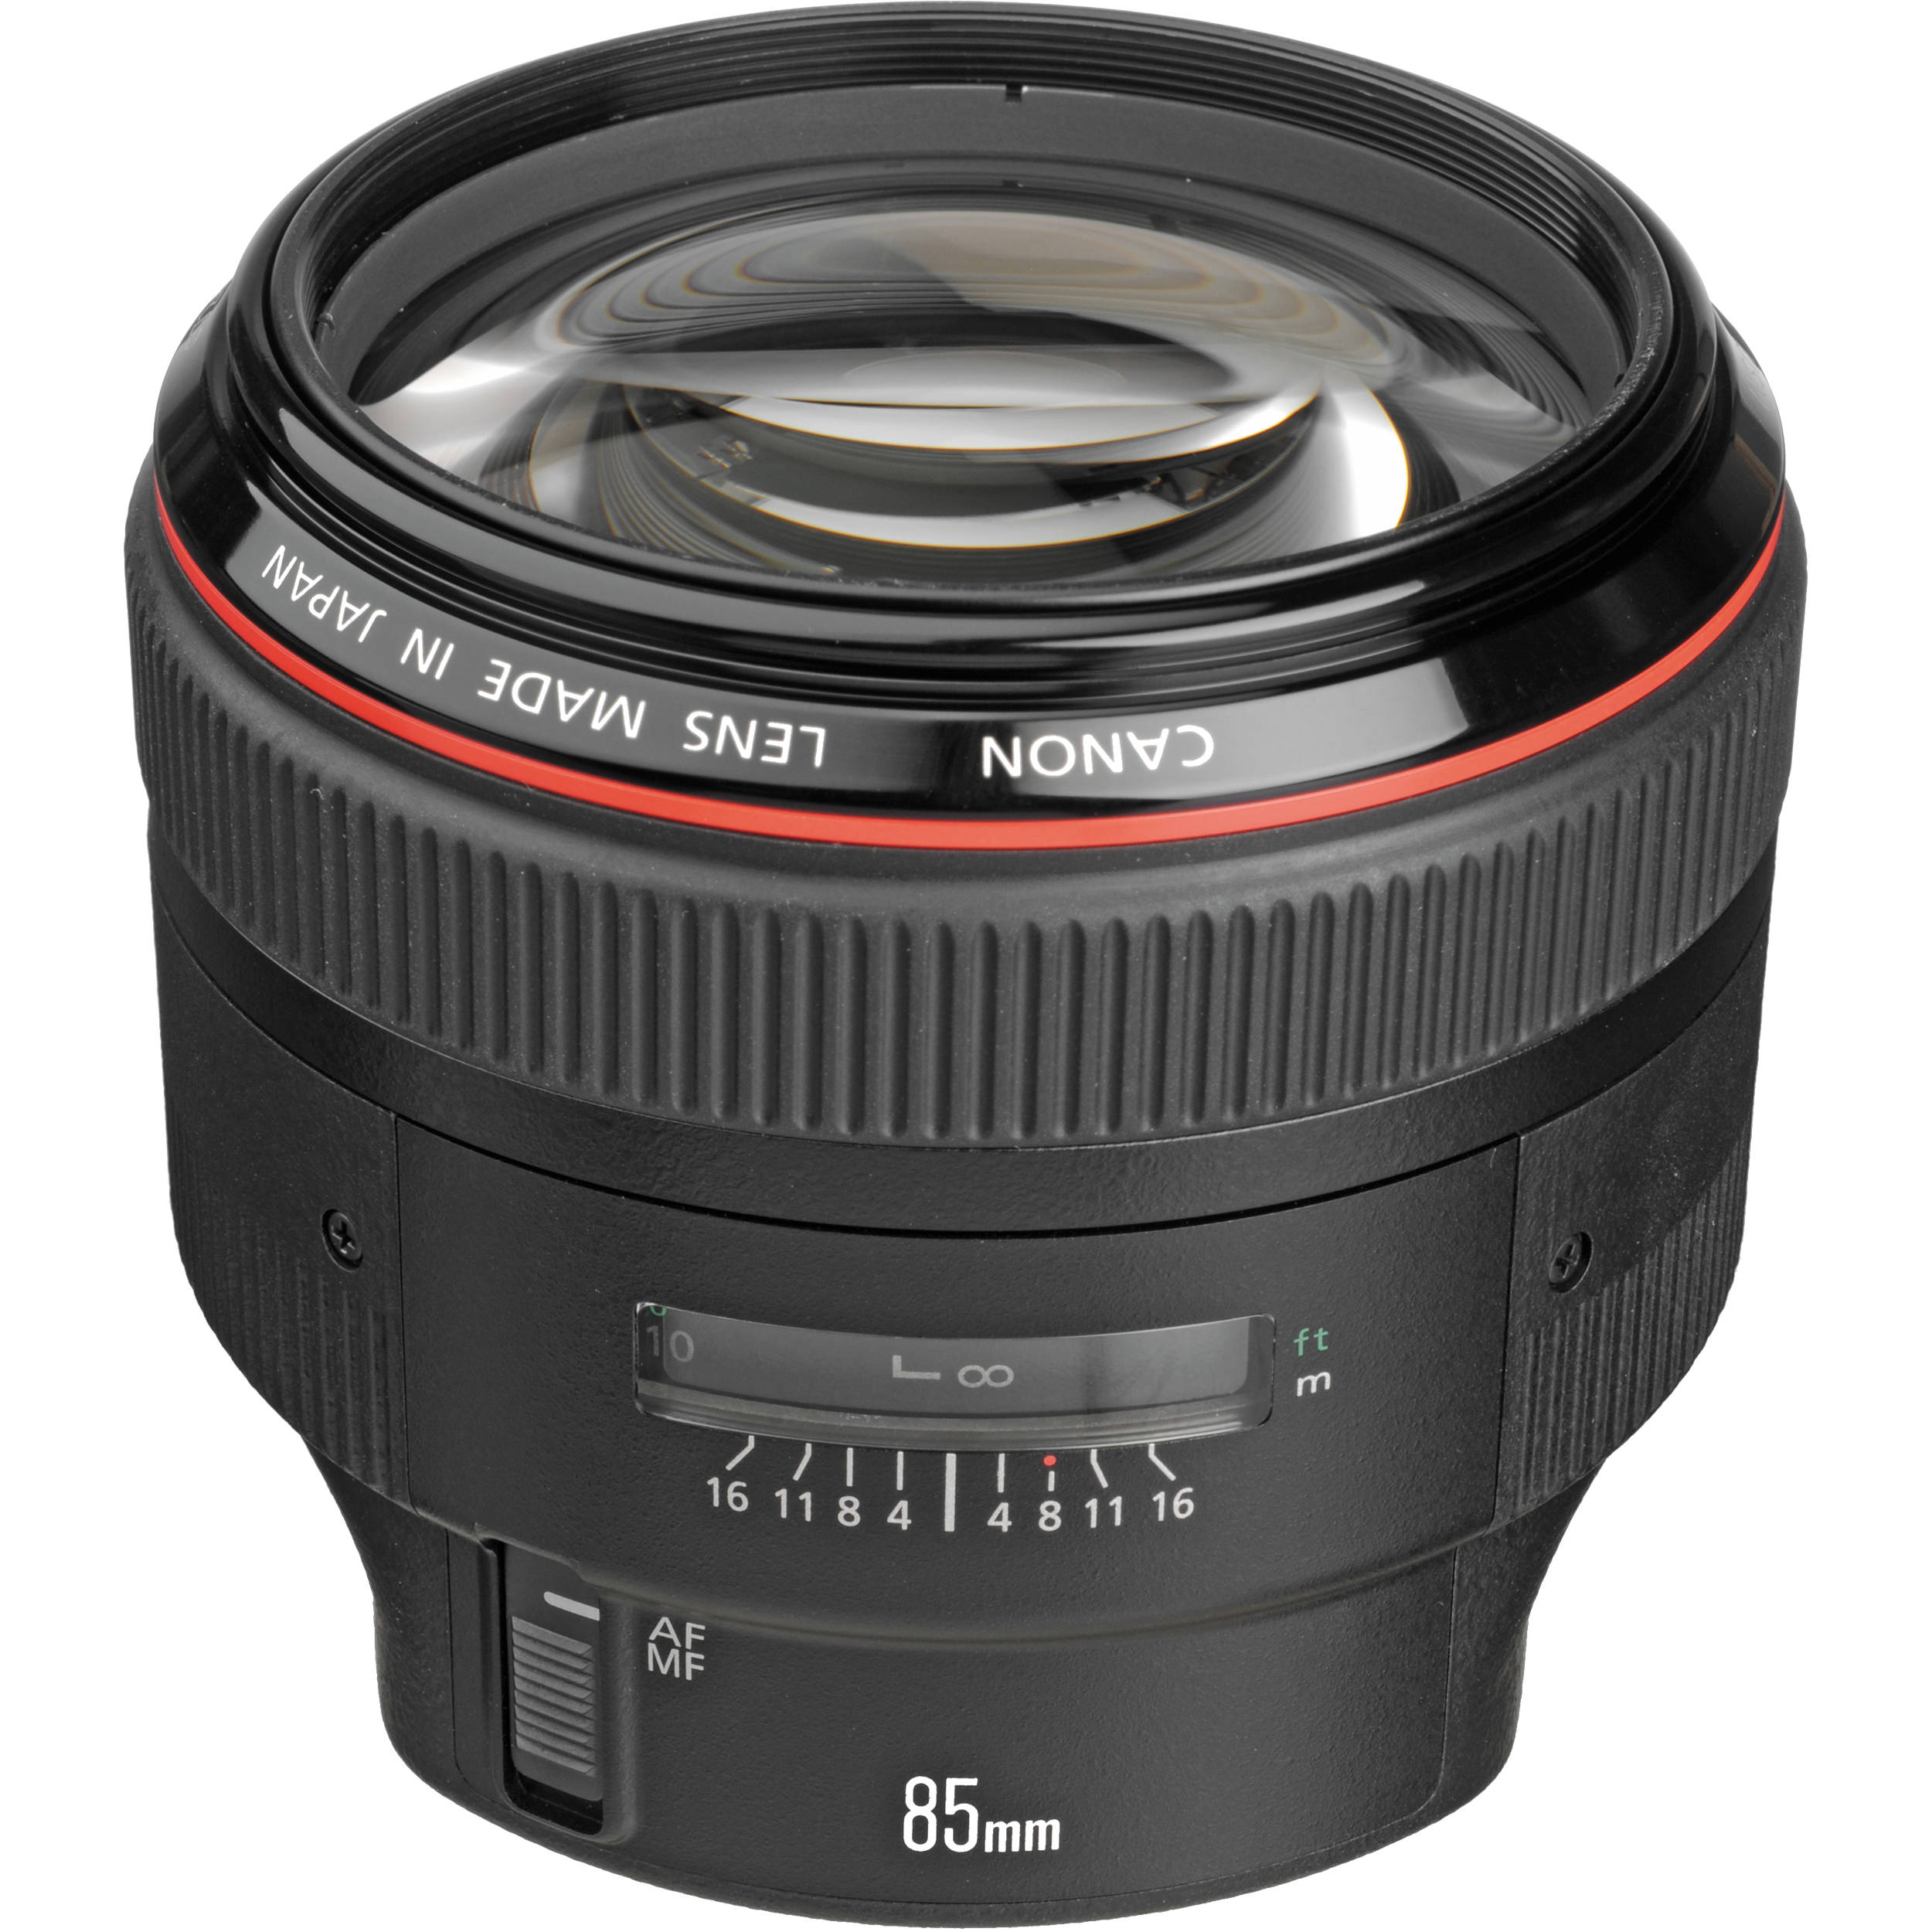 Canon 85mm f1.2L II USM cao cấp trong thiết kế